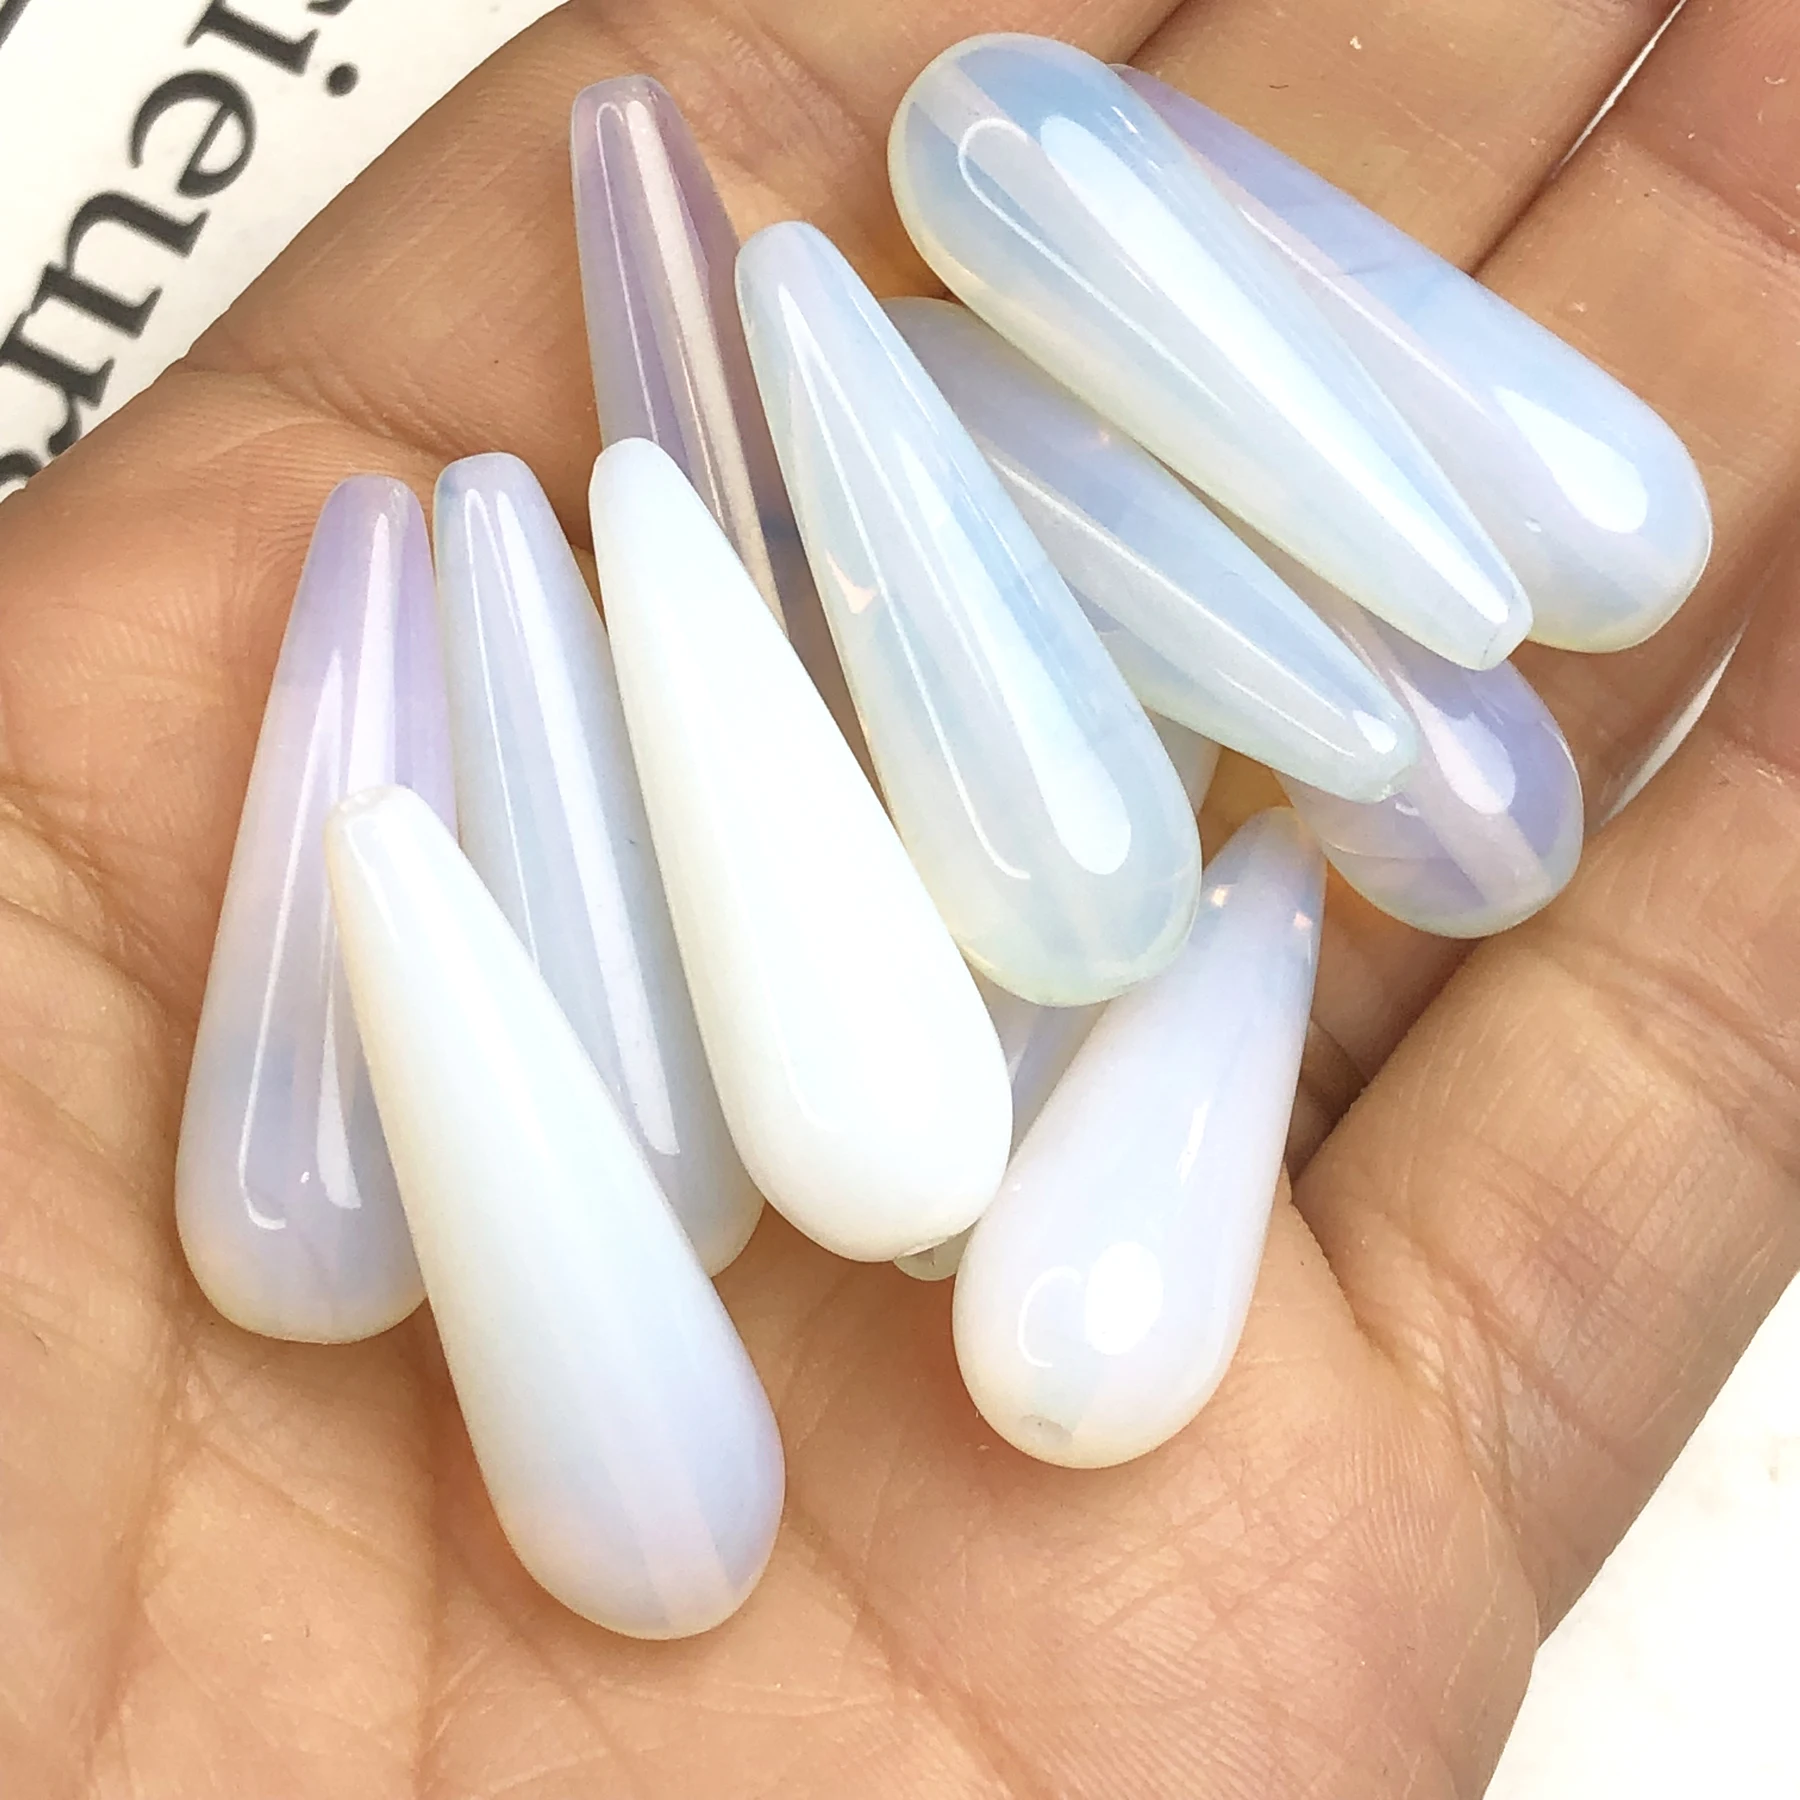 10x30mm Natural Water Drop White Opal Stone Beads Loose Energy Pendant Bead For Jewelry Making Diy Earing Accessorise Findings